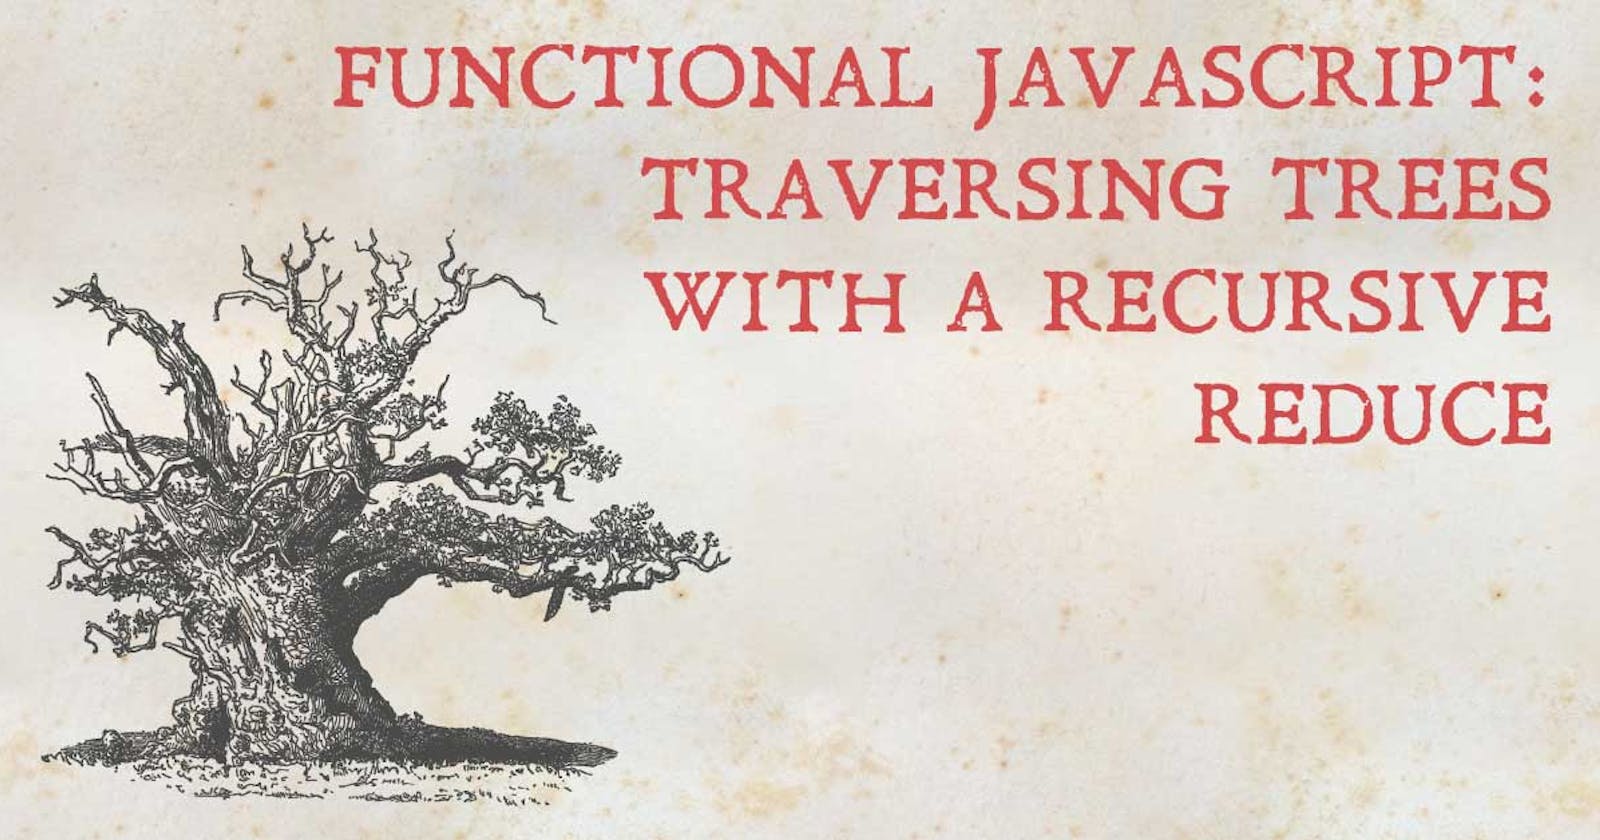 Functional JavaScript: Traversing Trees with a Recursive Reduce